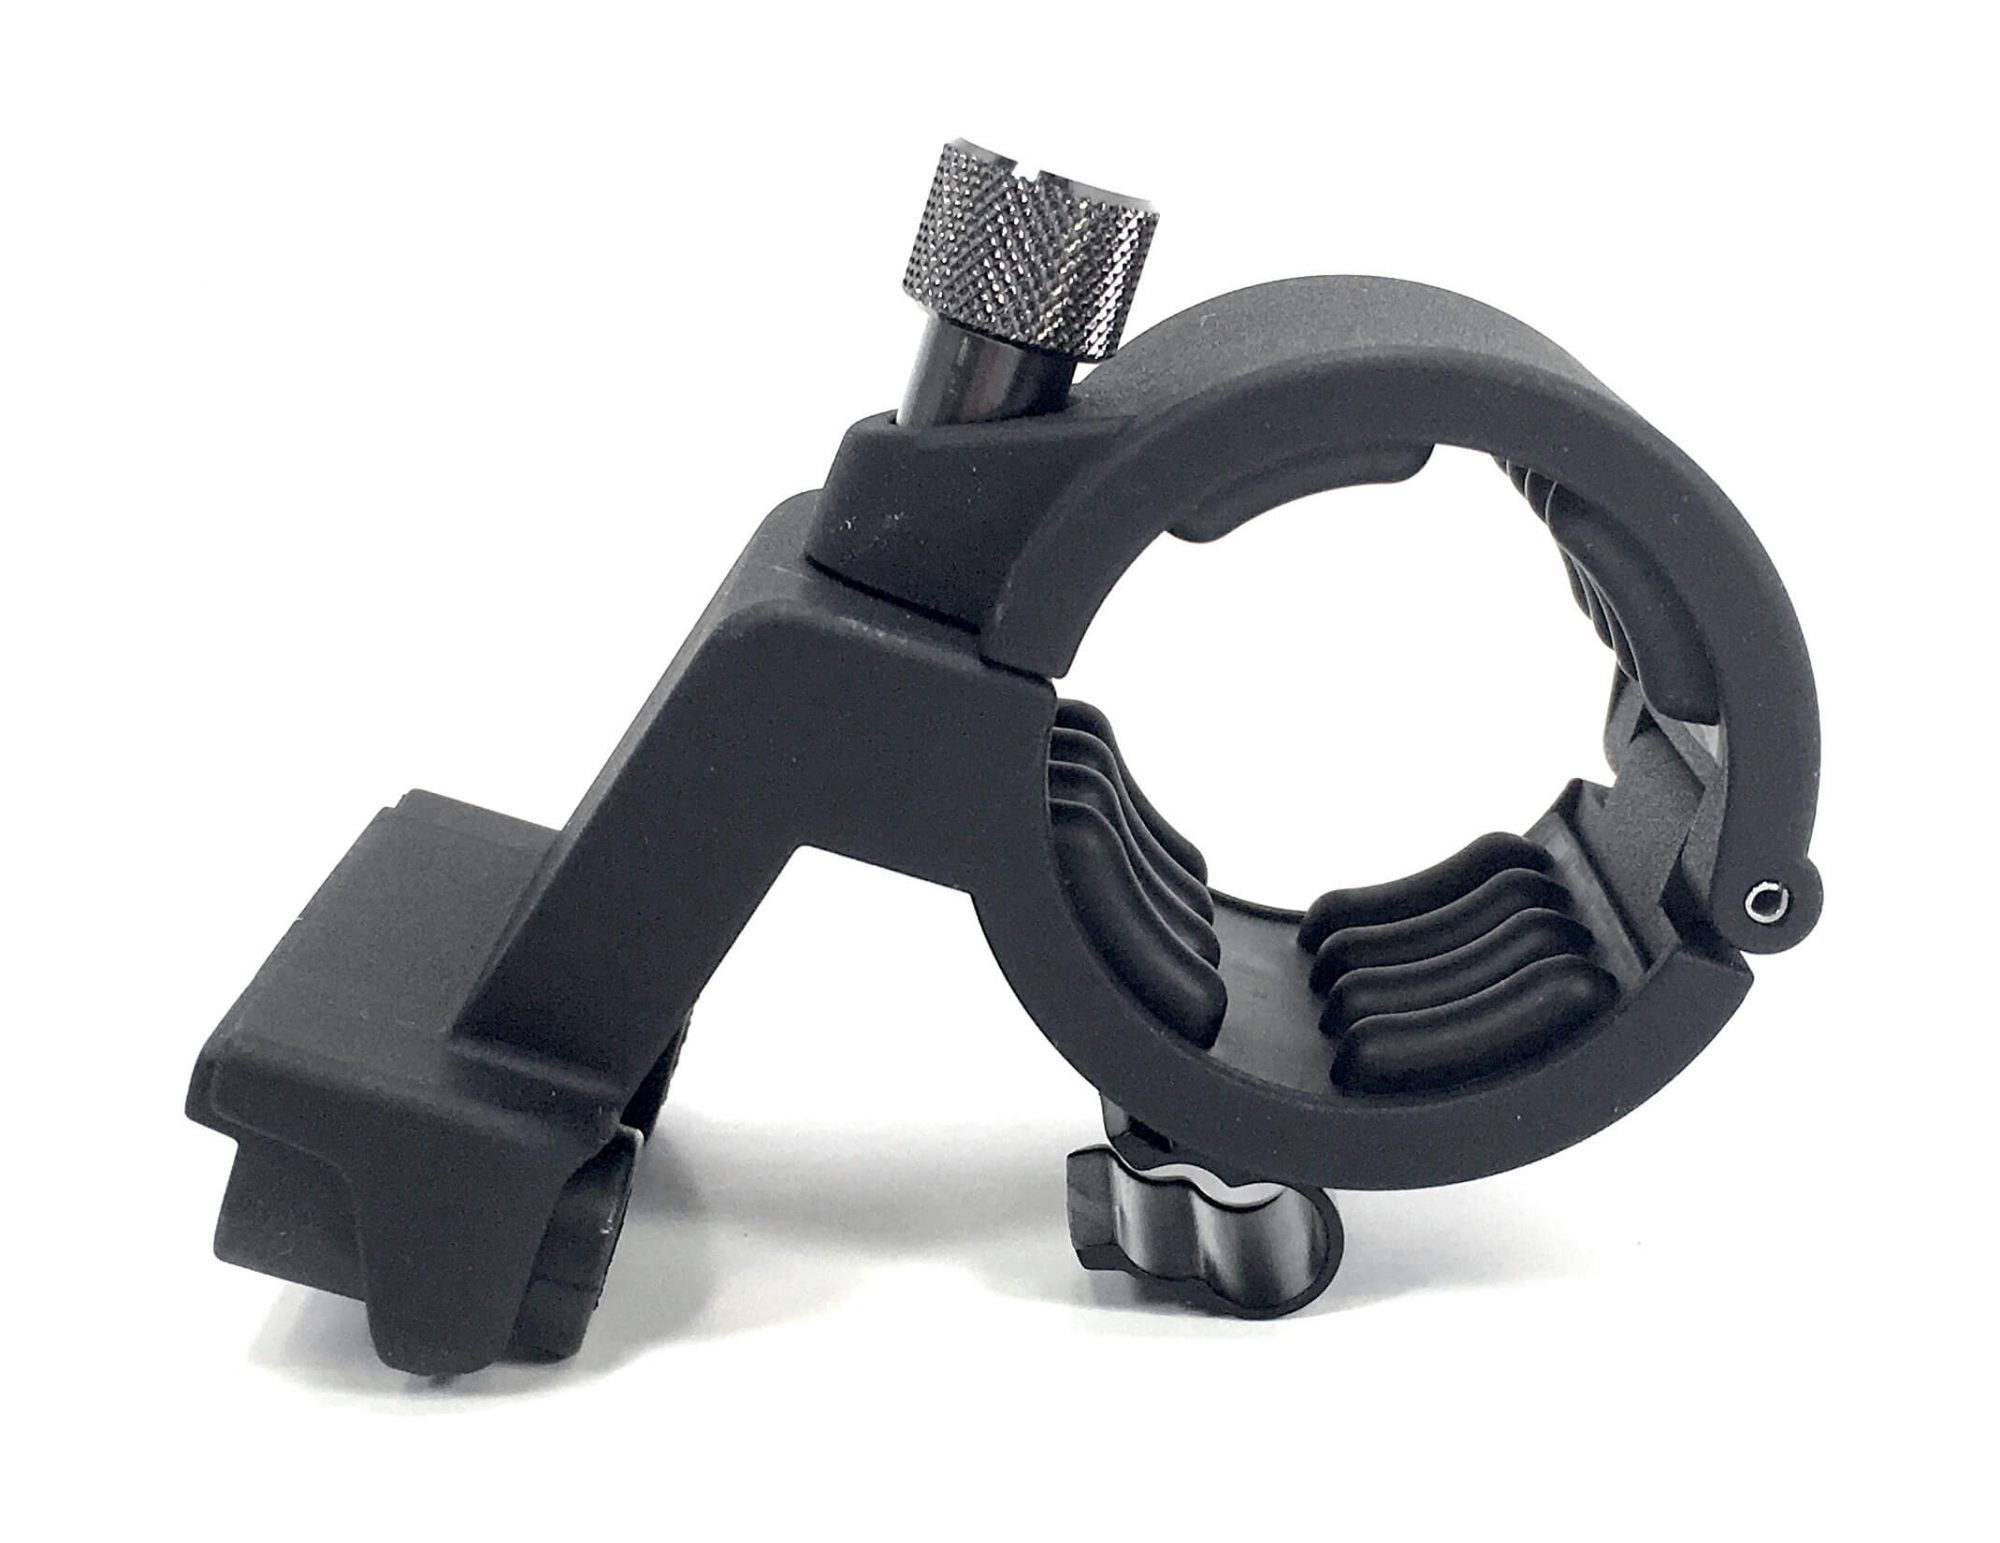 Original Microphone Holder for the Canon XA30 camcorder. It is a genuine Canon part, sourced directly from Canon USA. Brand new factory fresh. Free Shipping. Screws Sold Separately.